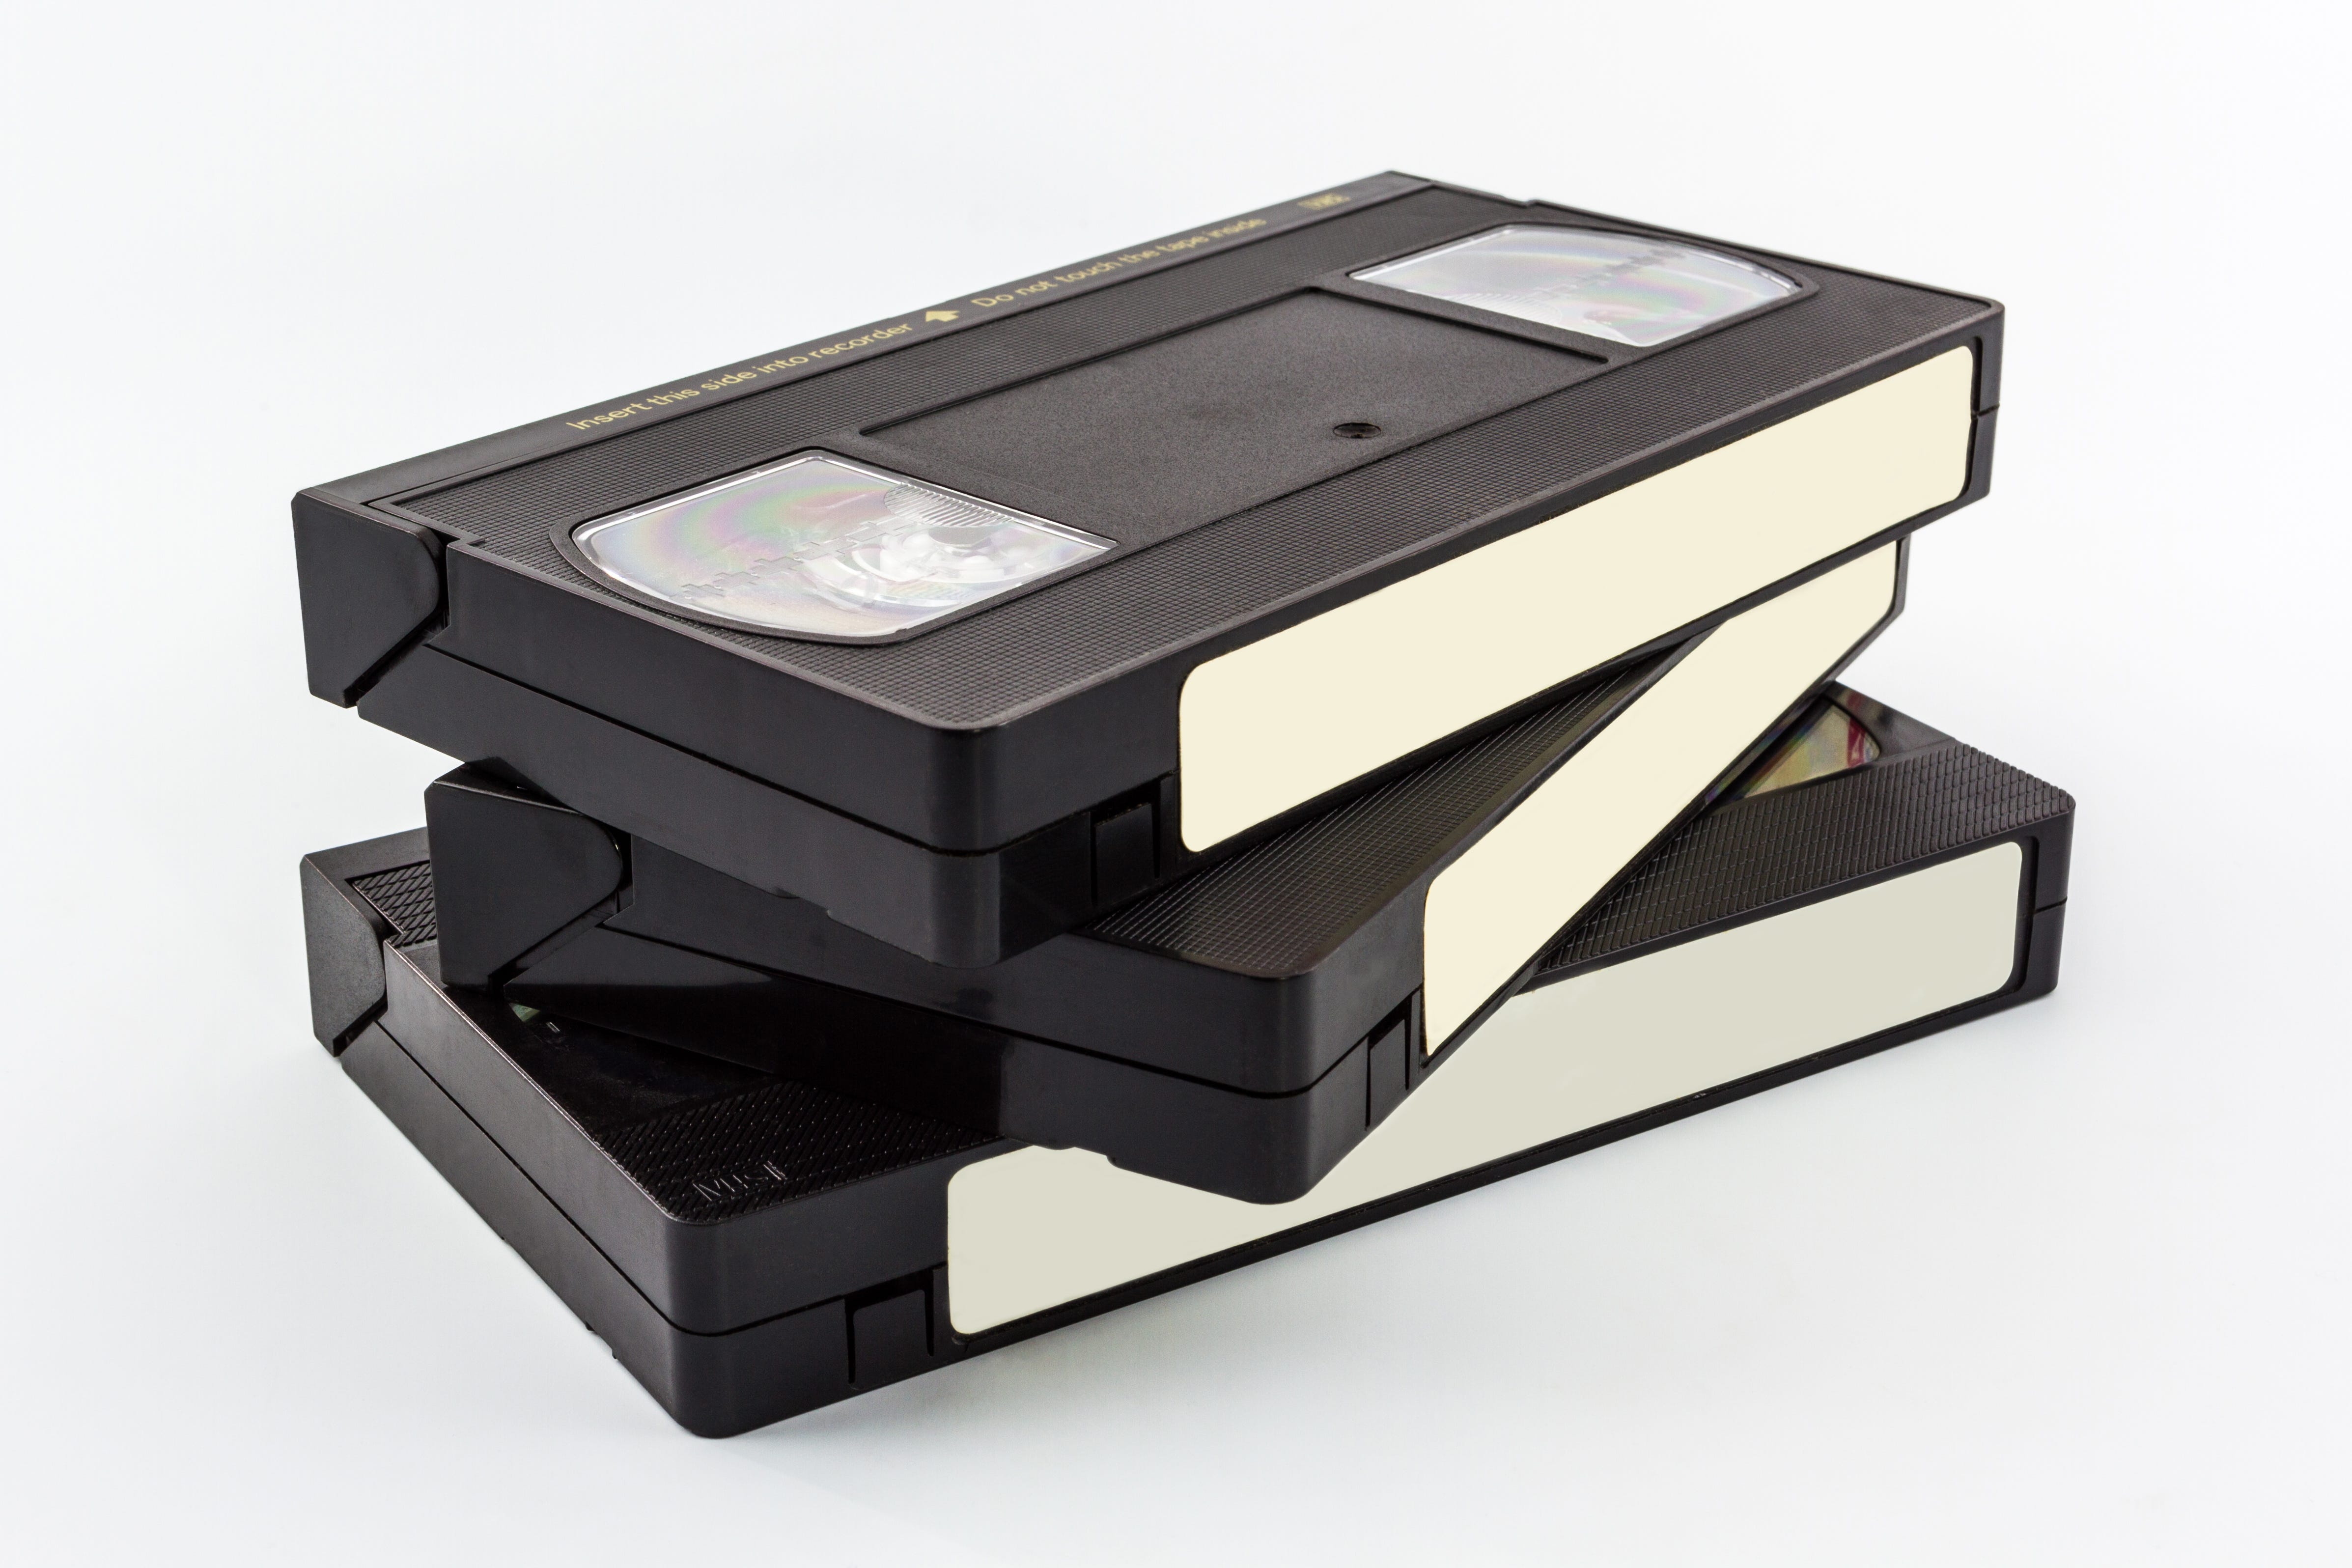 VHS tape collection mania fades but recycling options remain